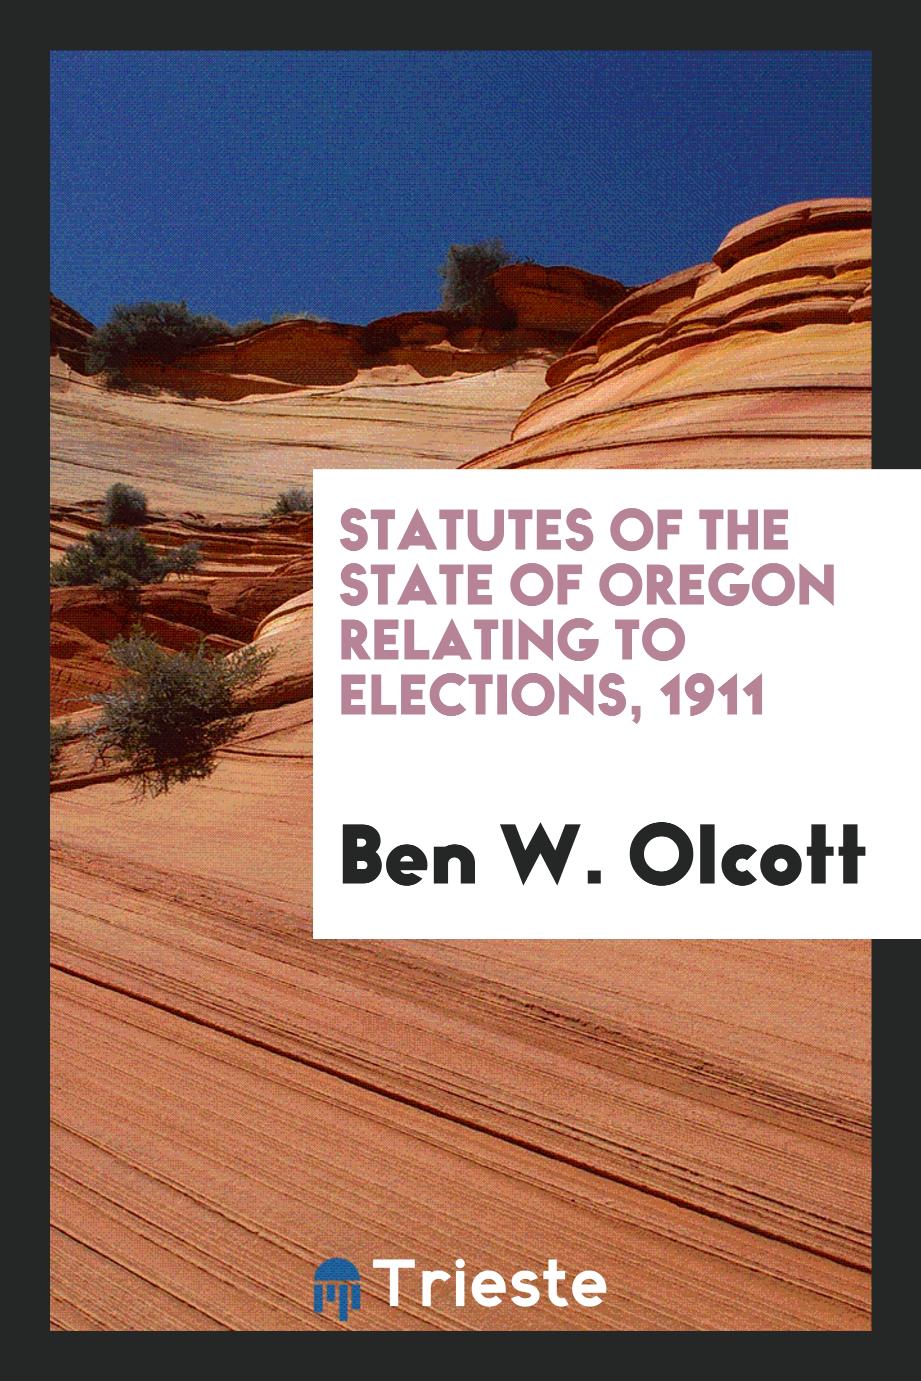 Statutes of the State of Oregon Relating to Elections, 1911